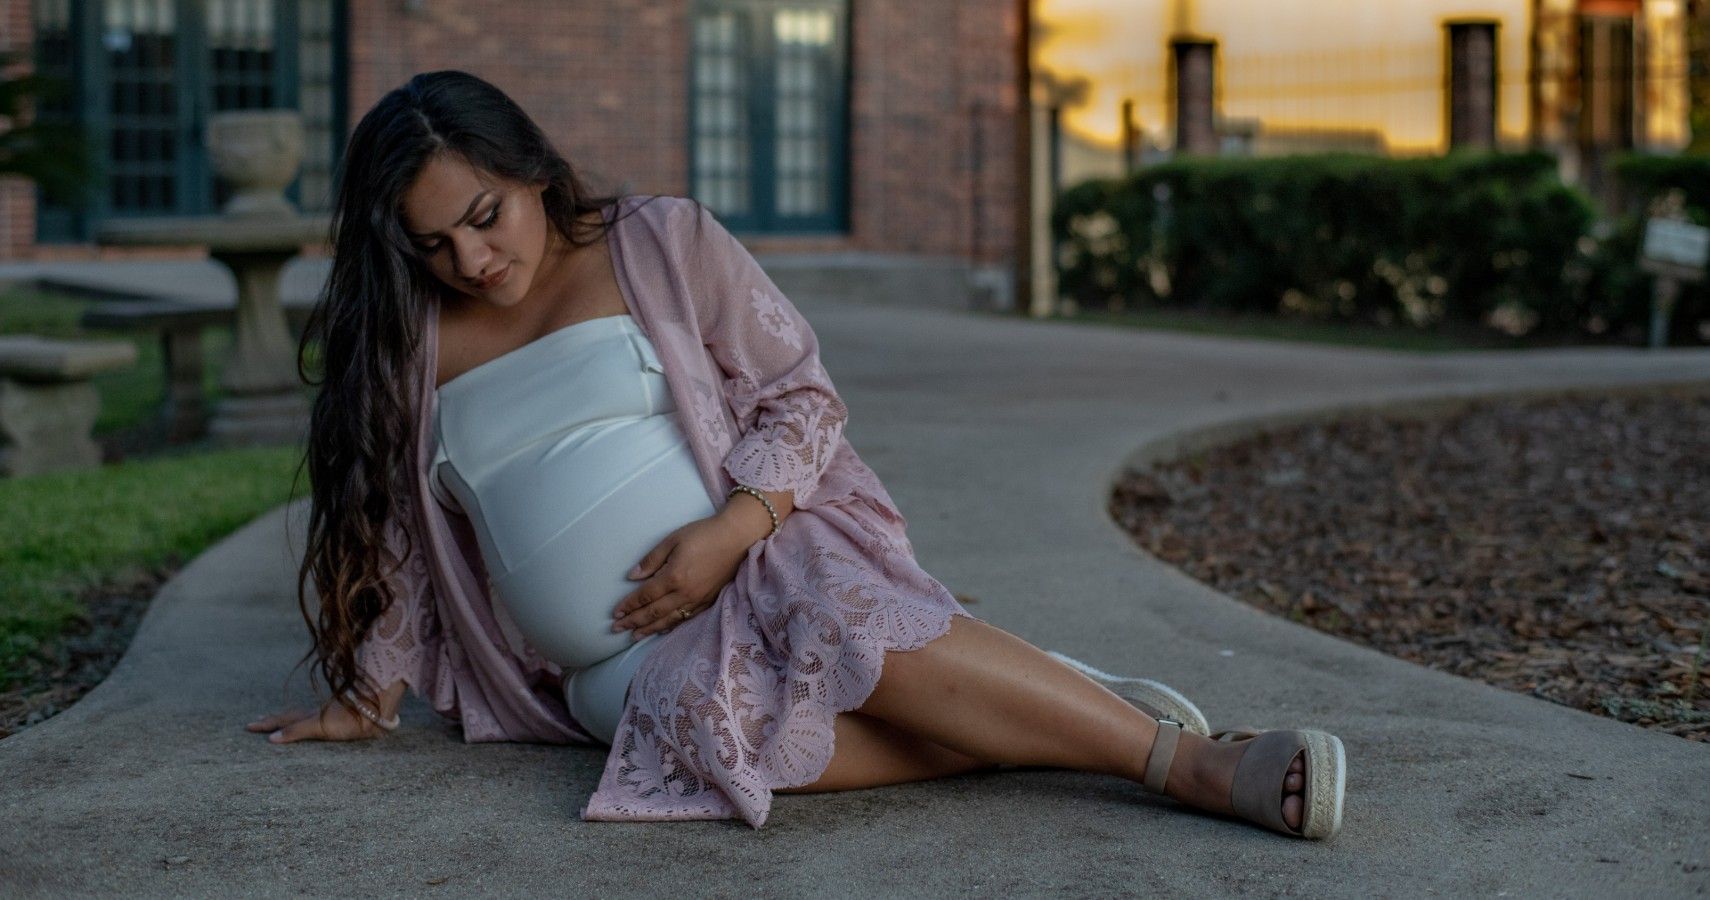 A pregnant bell that has dropped can signal many things to the expecting mother